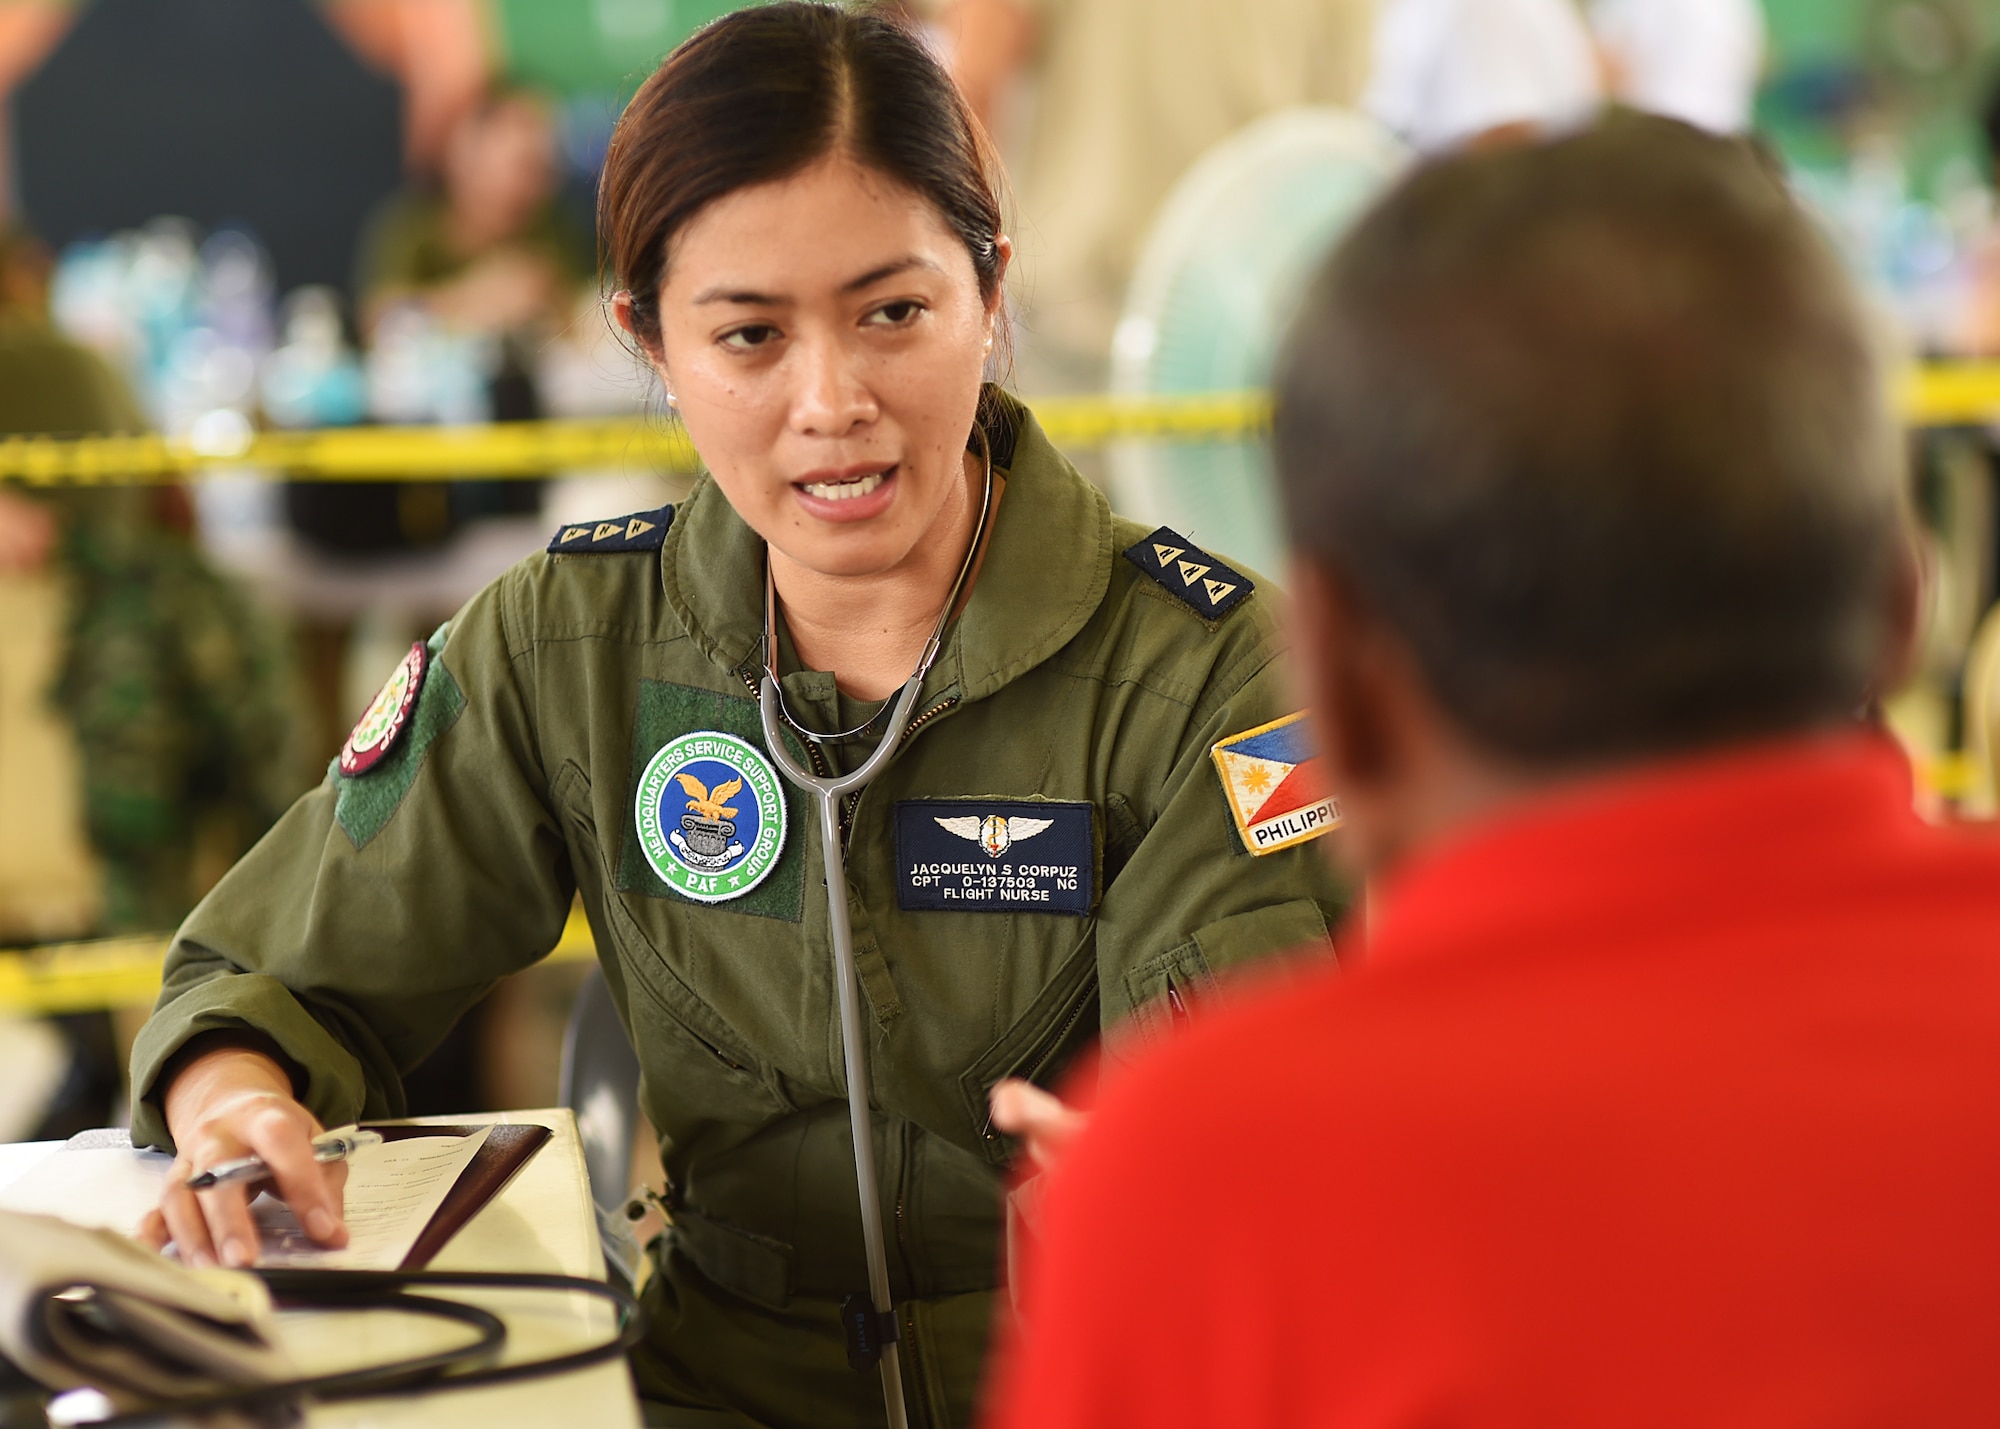 Philippine Air Force Capt. Jacquelyn Corpuz, a PAF flight nurse, questions a patient about his general heath during Pacific Angel’s healthcare services outreach, Bohol Province, Philippines, Aug. 16, 2015. The healthcare services outreach program provided general care, optometry services, dental care, physical therapy and a pharmacy. Pacific Angel is a multilateral humanitarian assistance civil military operation, which improves military-to-military partnerships in the Pacific while also providing medical health outreach, civic engineering projects and subject matter exchanges among partner forces.(U.S. Air Force photo by Tech. Sgt. Aaron Oelrich/Released)